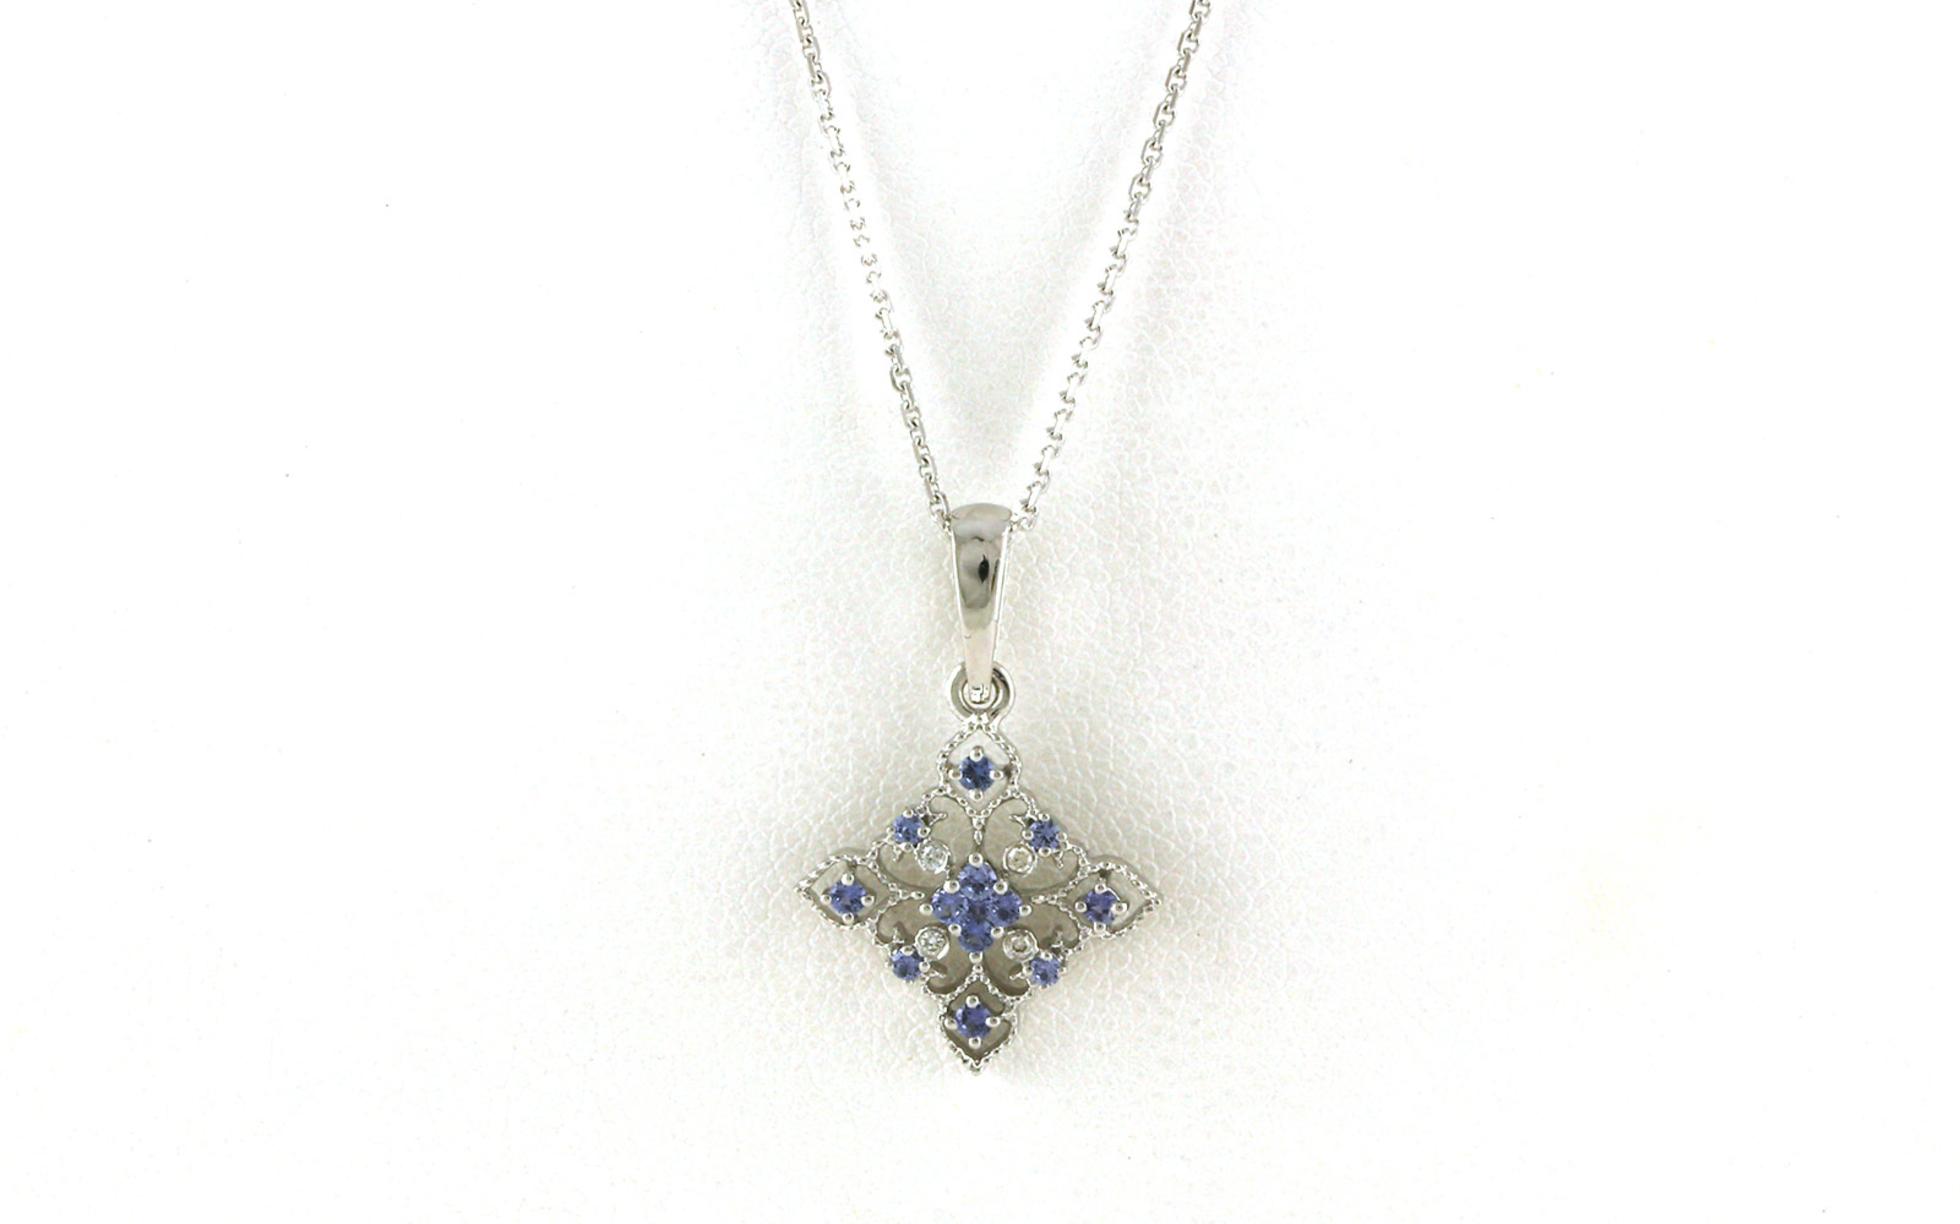 Filigree-style Kite Montana Yogo Sapphire Necklace in White Gold (0.22cts TWT)